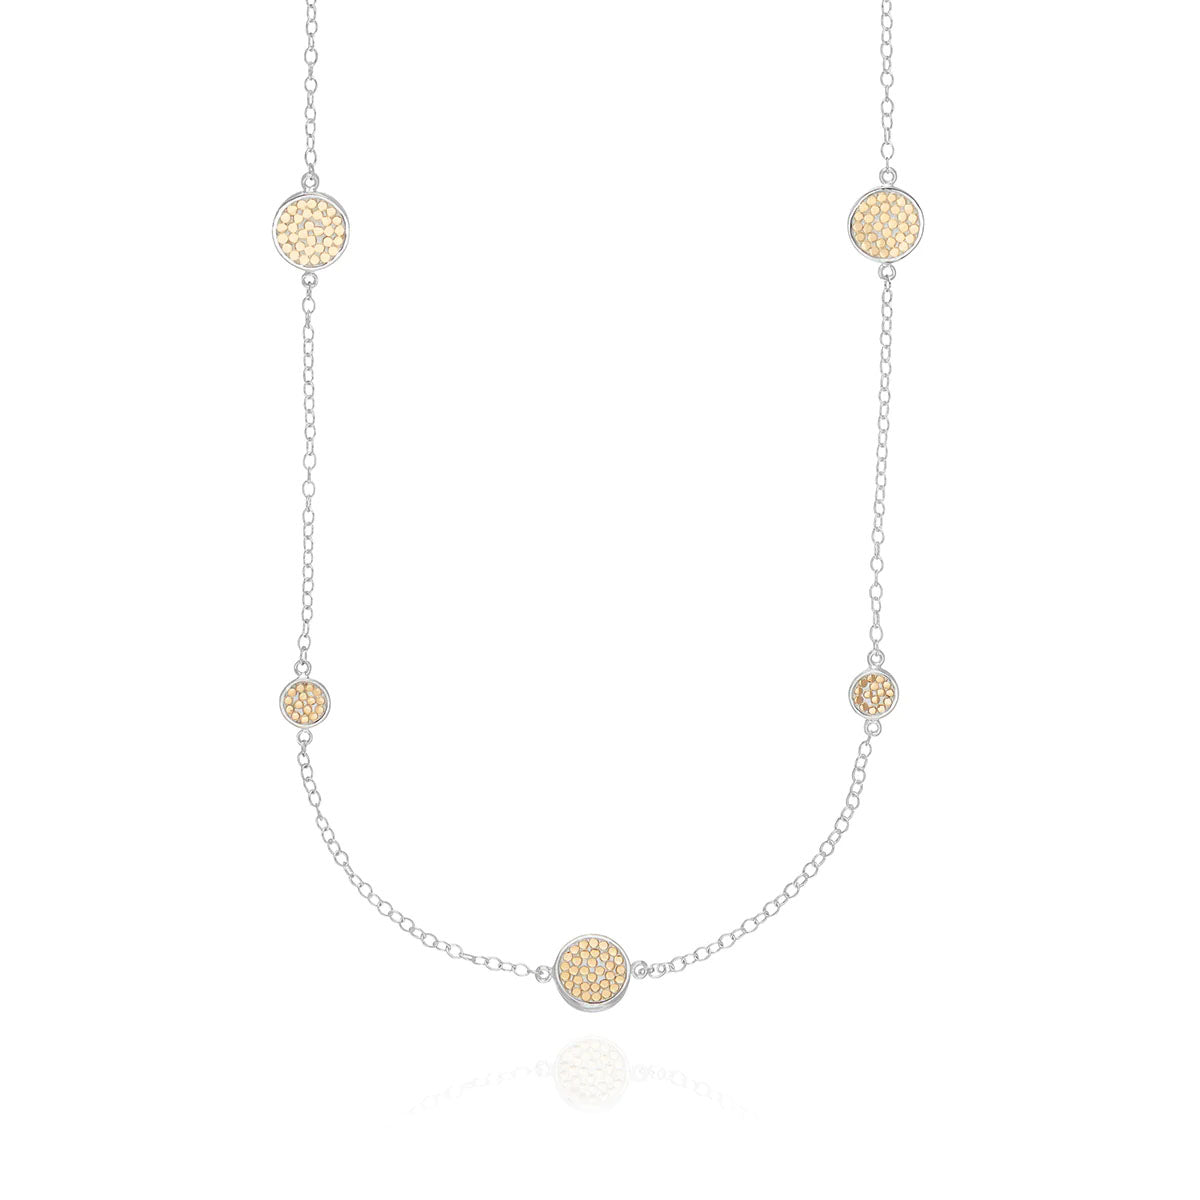 Anna Beck Classic Long Multi-Disc Station Necklace - Gold & Silver 